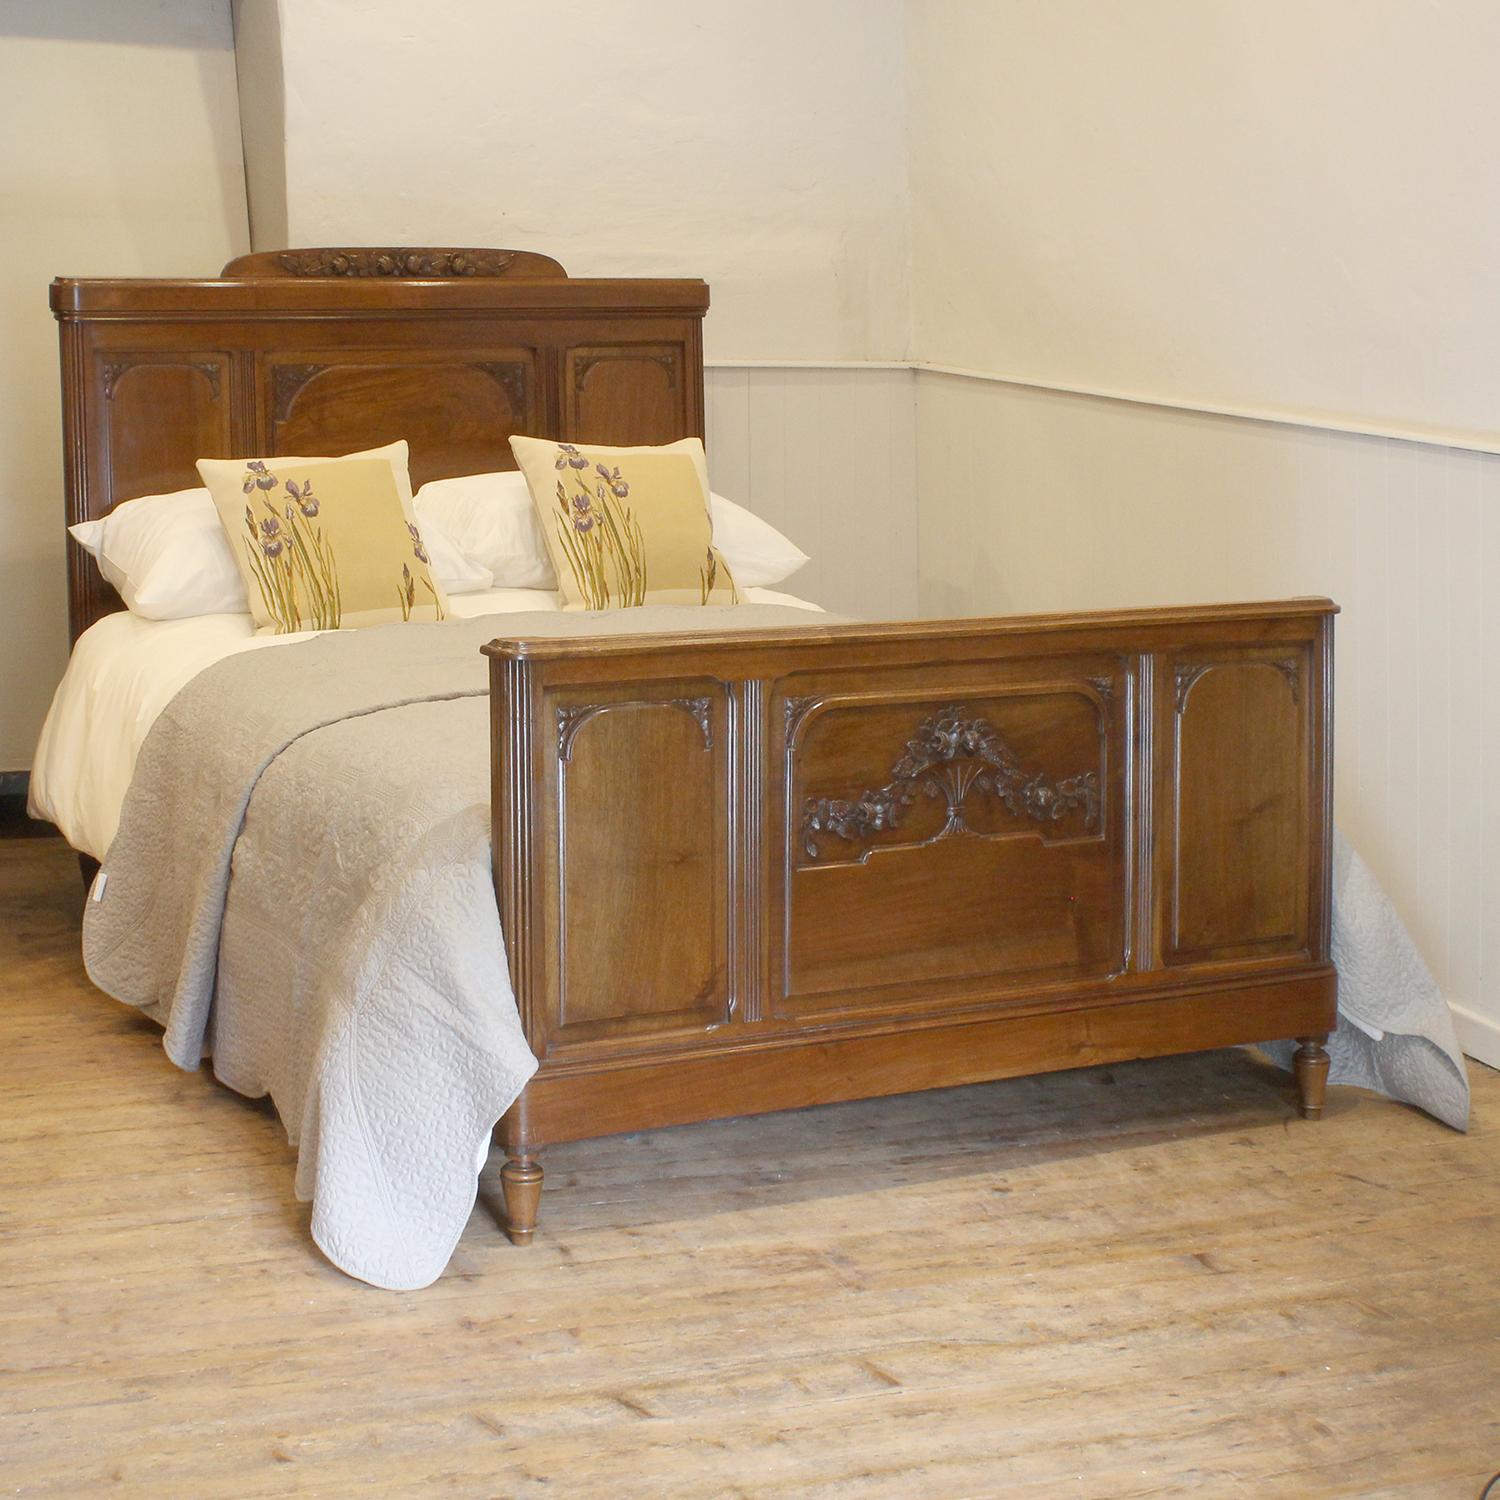 A fine Art Deco bed from walnut with turned feet and low head panel.

This bed accepts a standard double, 4ft 6in (54 in), base and mattress set.

The price is for the bed frame and a firm bed base. 

The mattress, sprung bed base, bedding and linen